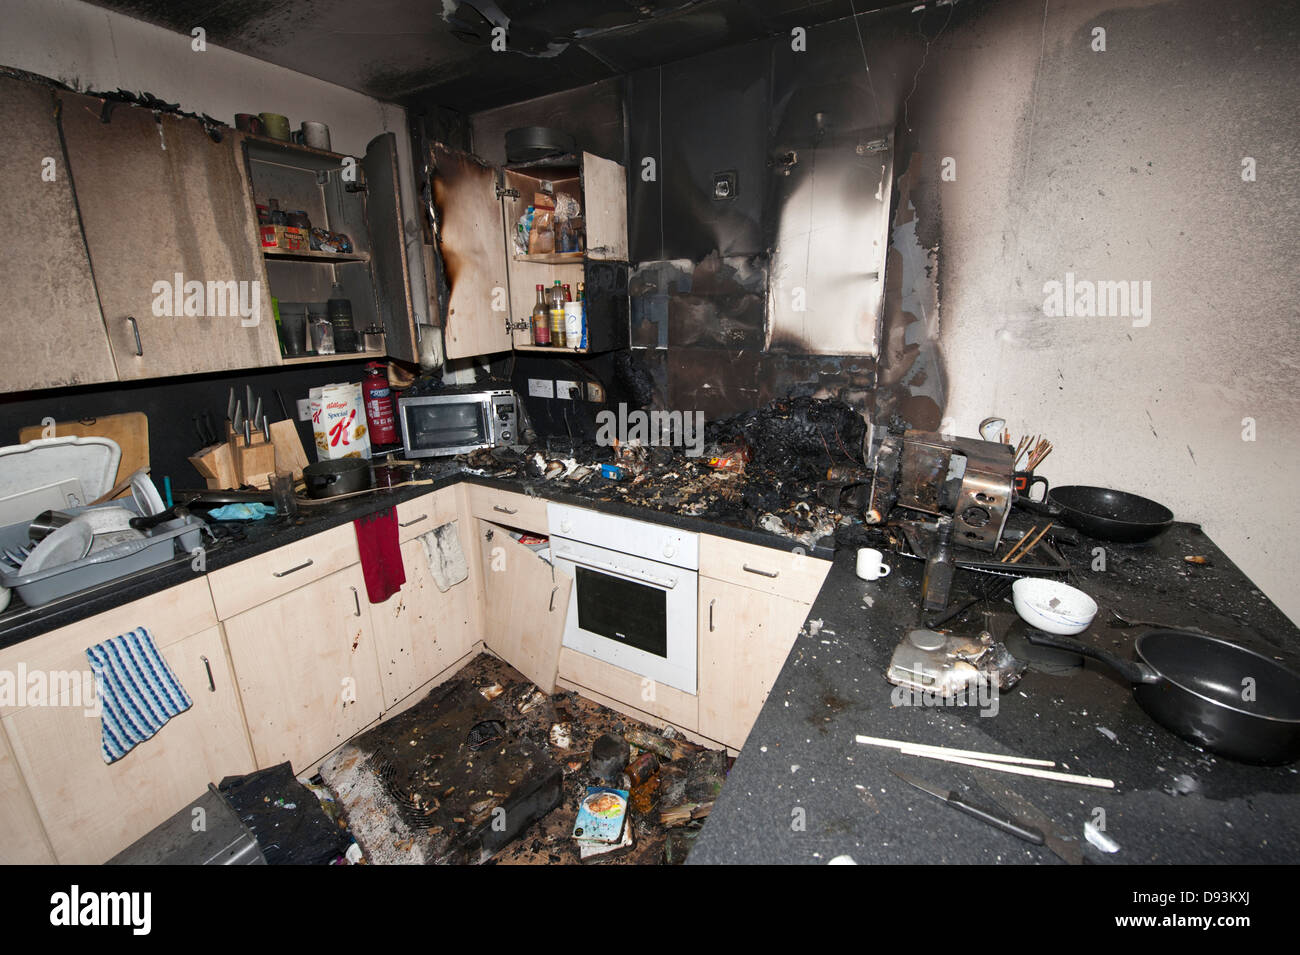 Severe Cooking Kitchen Fire Burnt Insurance Claim Stock Photo